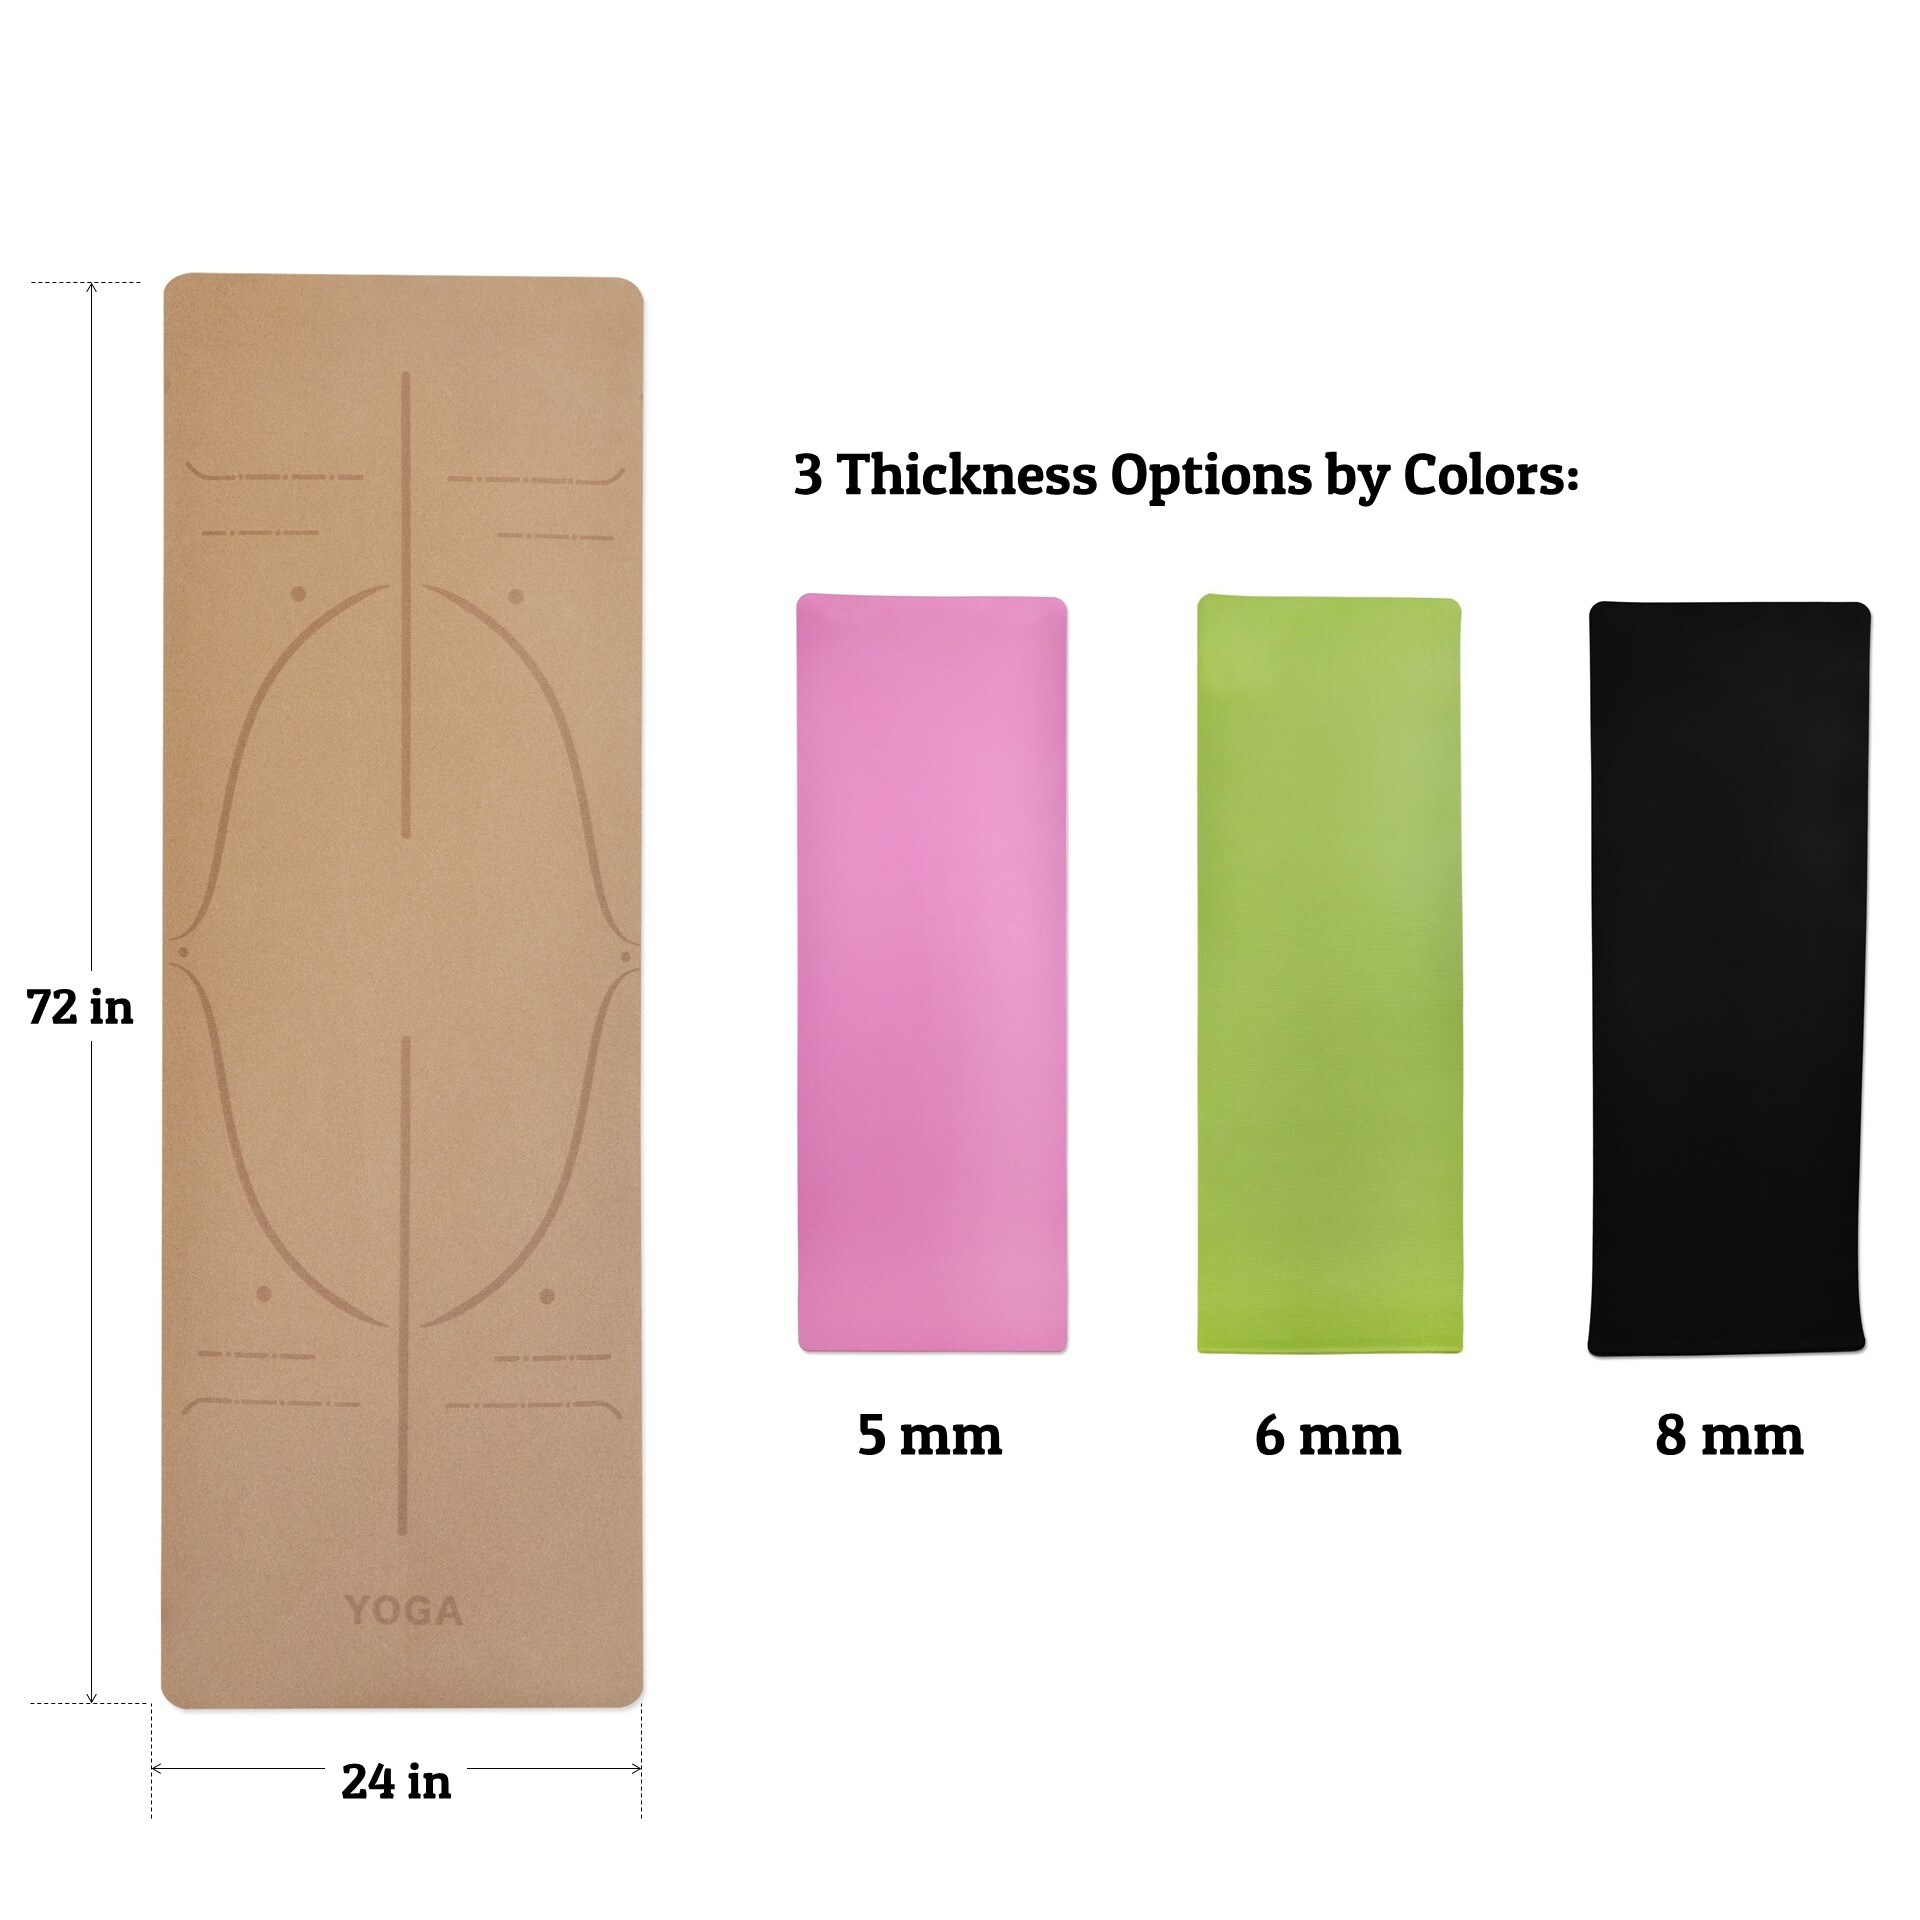 Natural Cork Rubber Yoga Mat Non Slip for Home Gym Yoga Pilates Workout  Exercise, 72X24 IN - 6x2 - Bed Bath & Beyond - 33055767